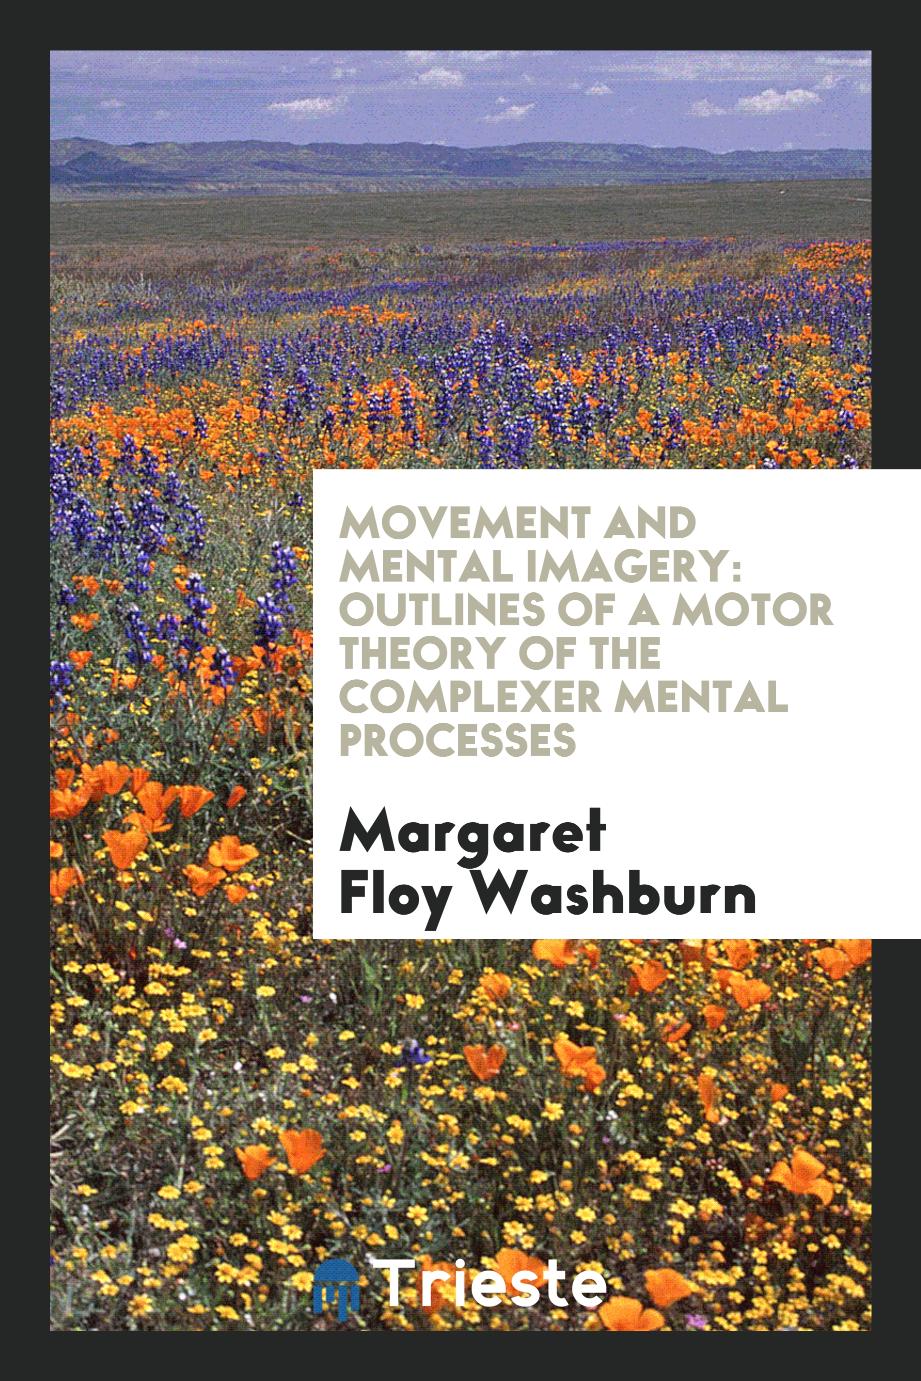 Movement and mental imagery: outlines of a motor theory of the complexer mental processes